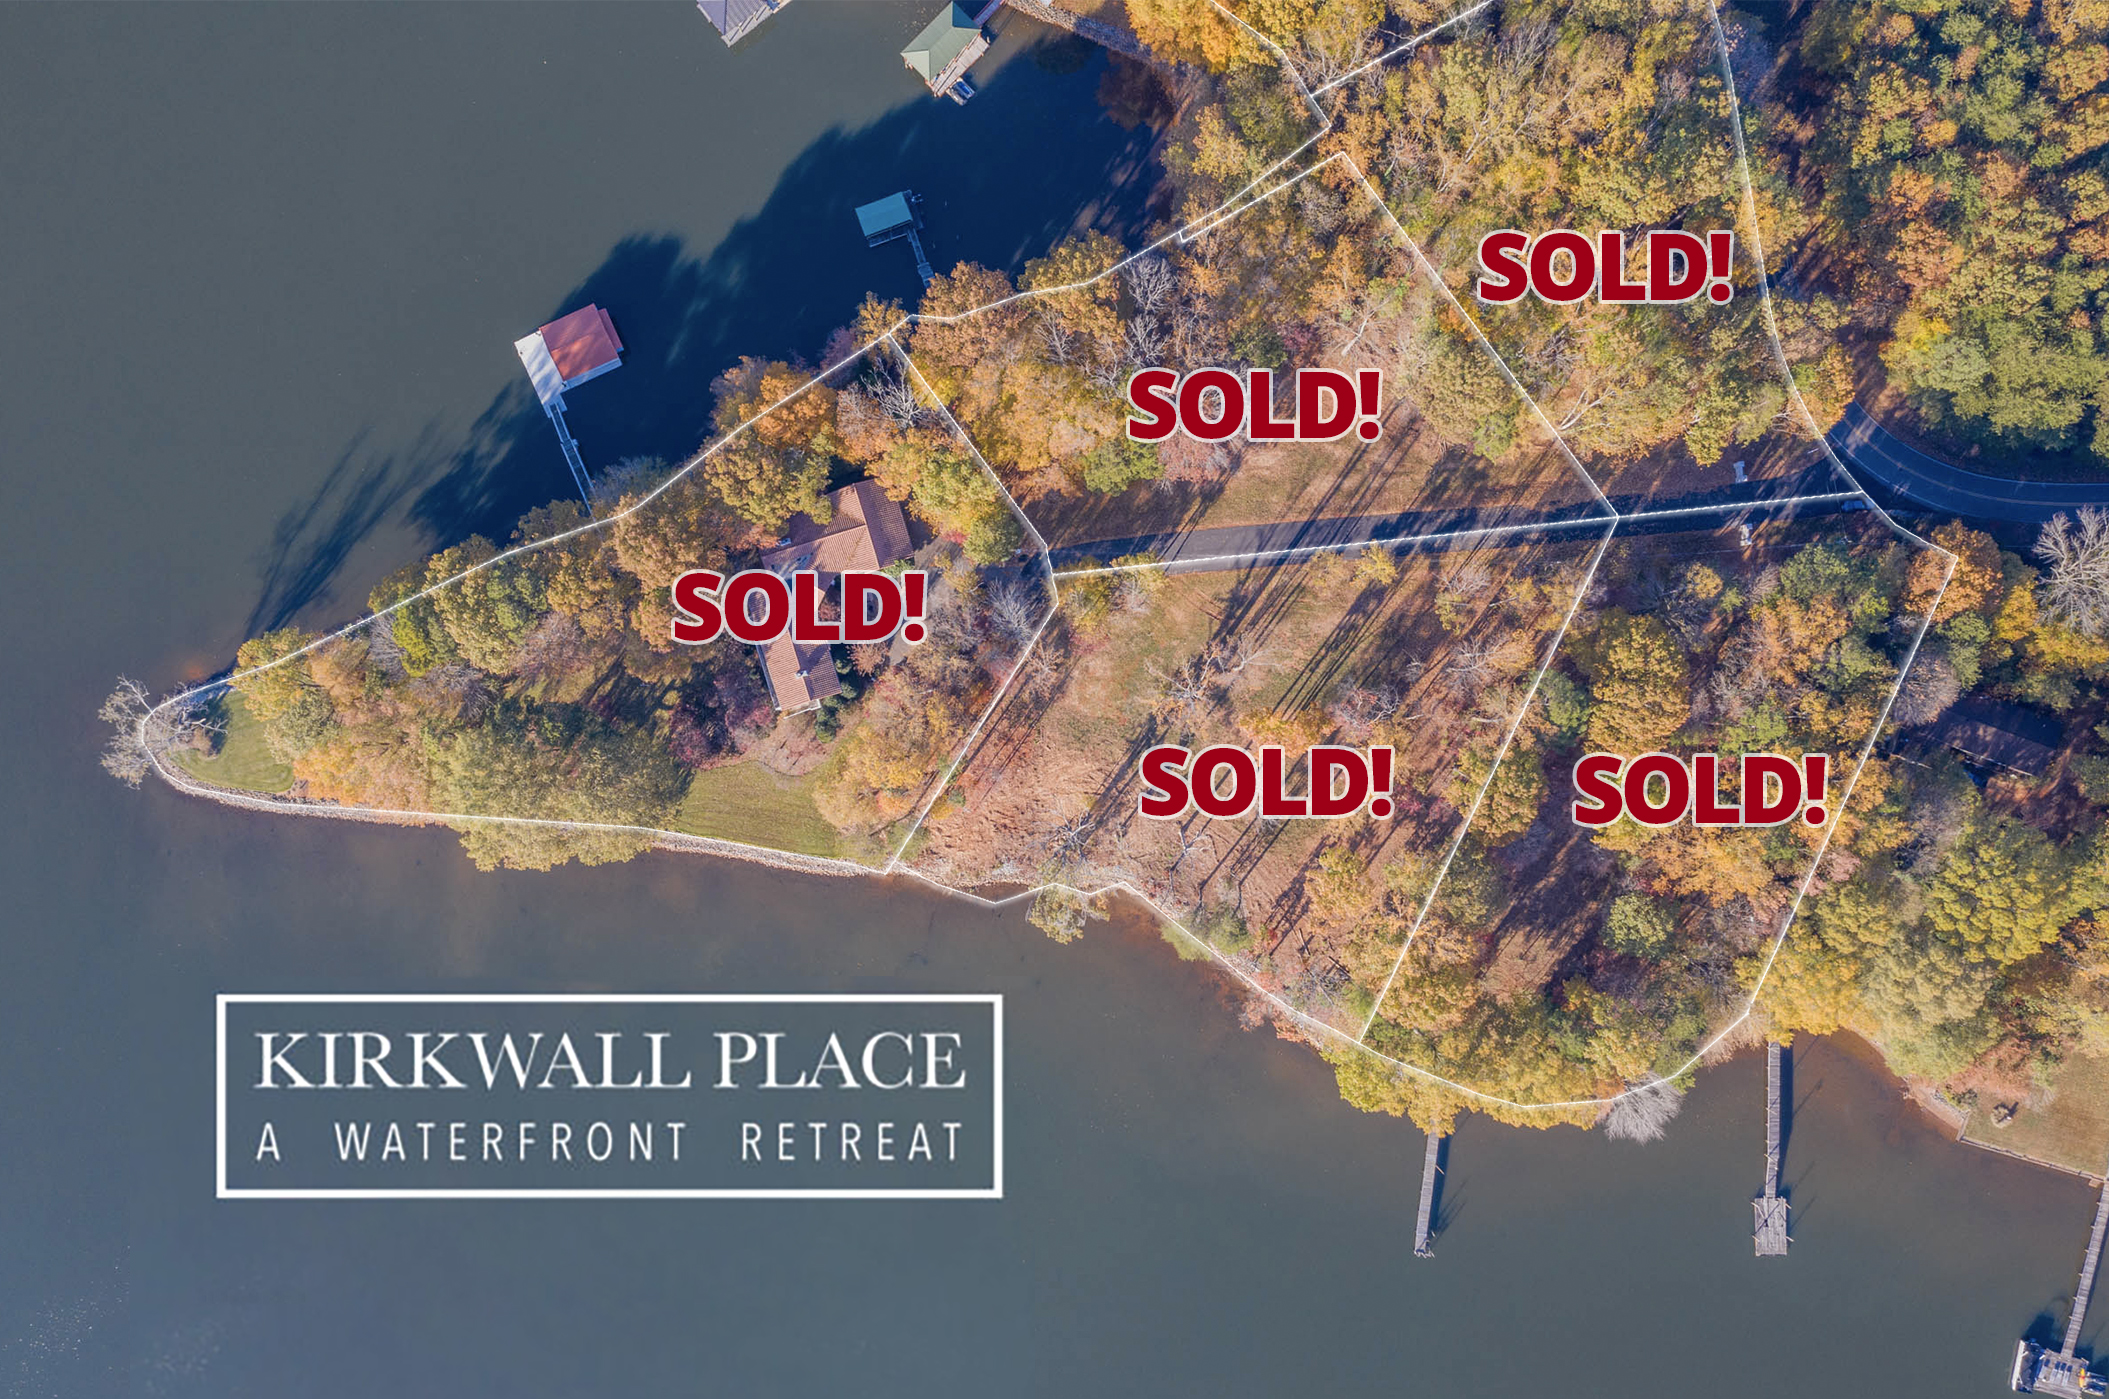 Kirkwall Place, A Waterfront Retreat. All lots are sold!